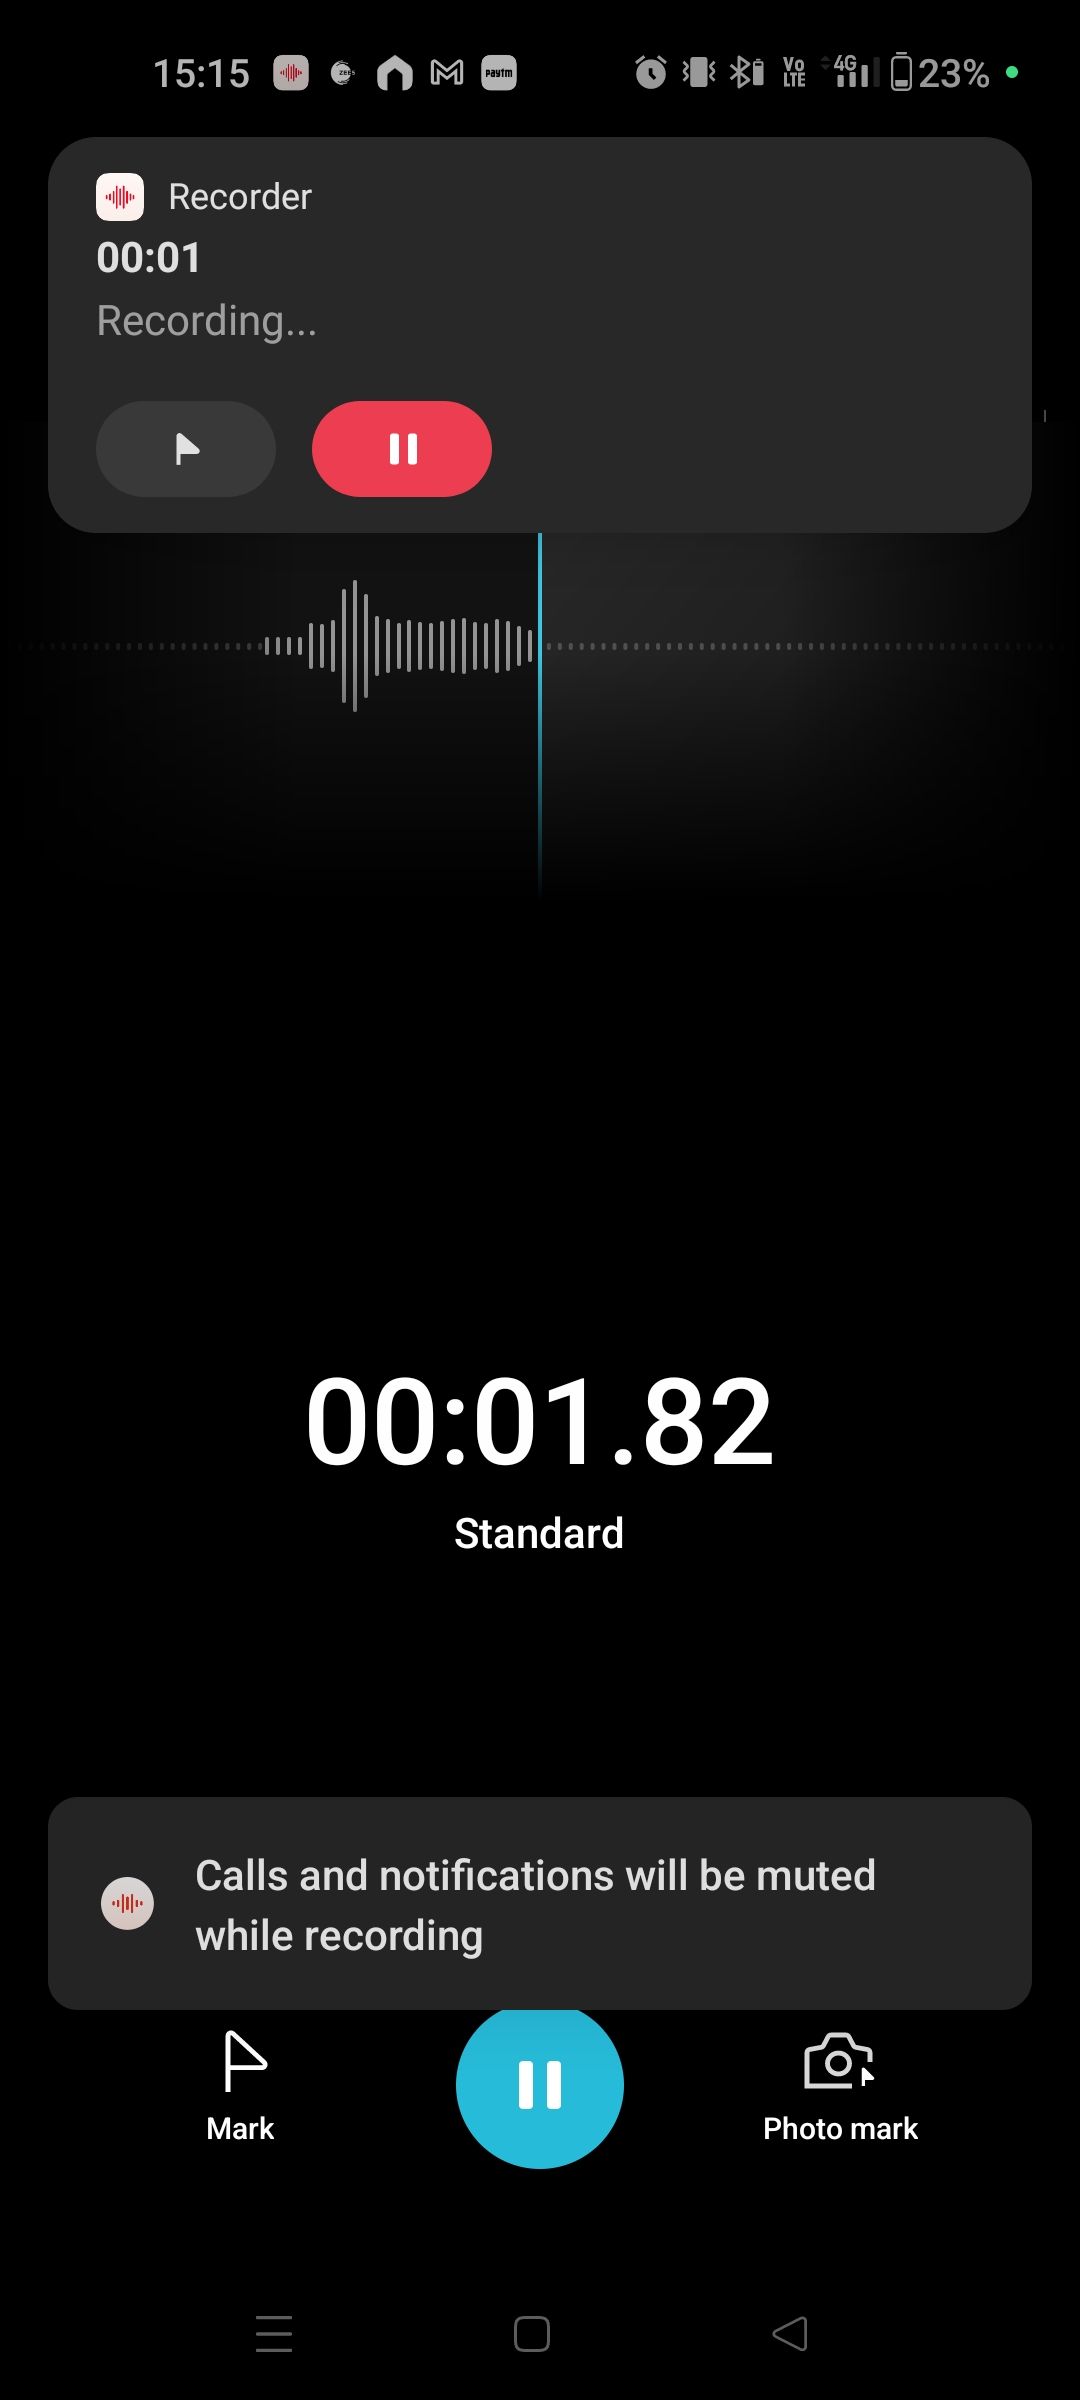 Recording and Timer Will Start in Recorder